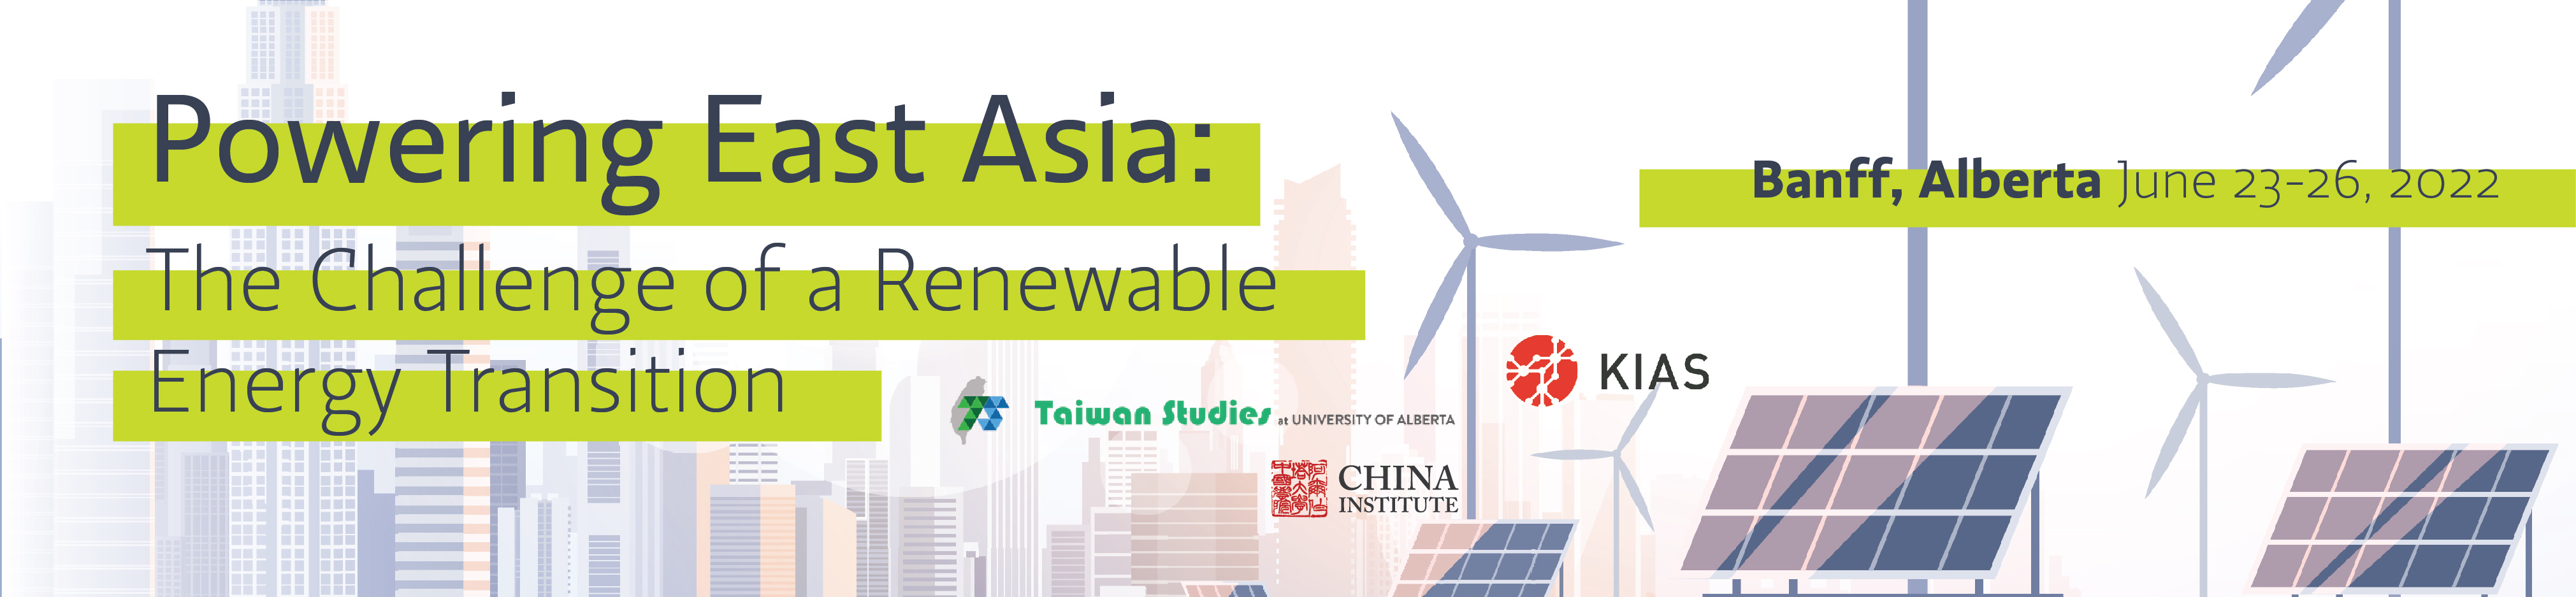 carousel banner for Powering East Asia event